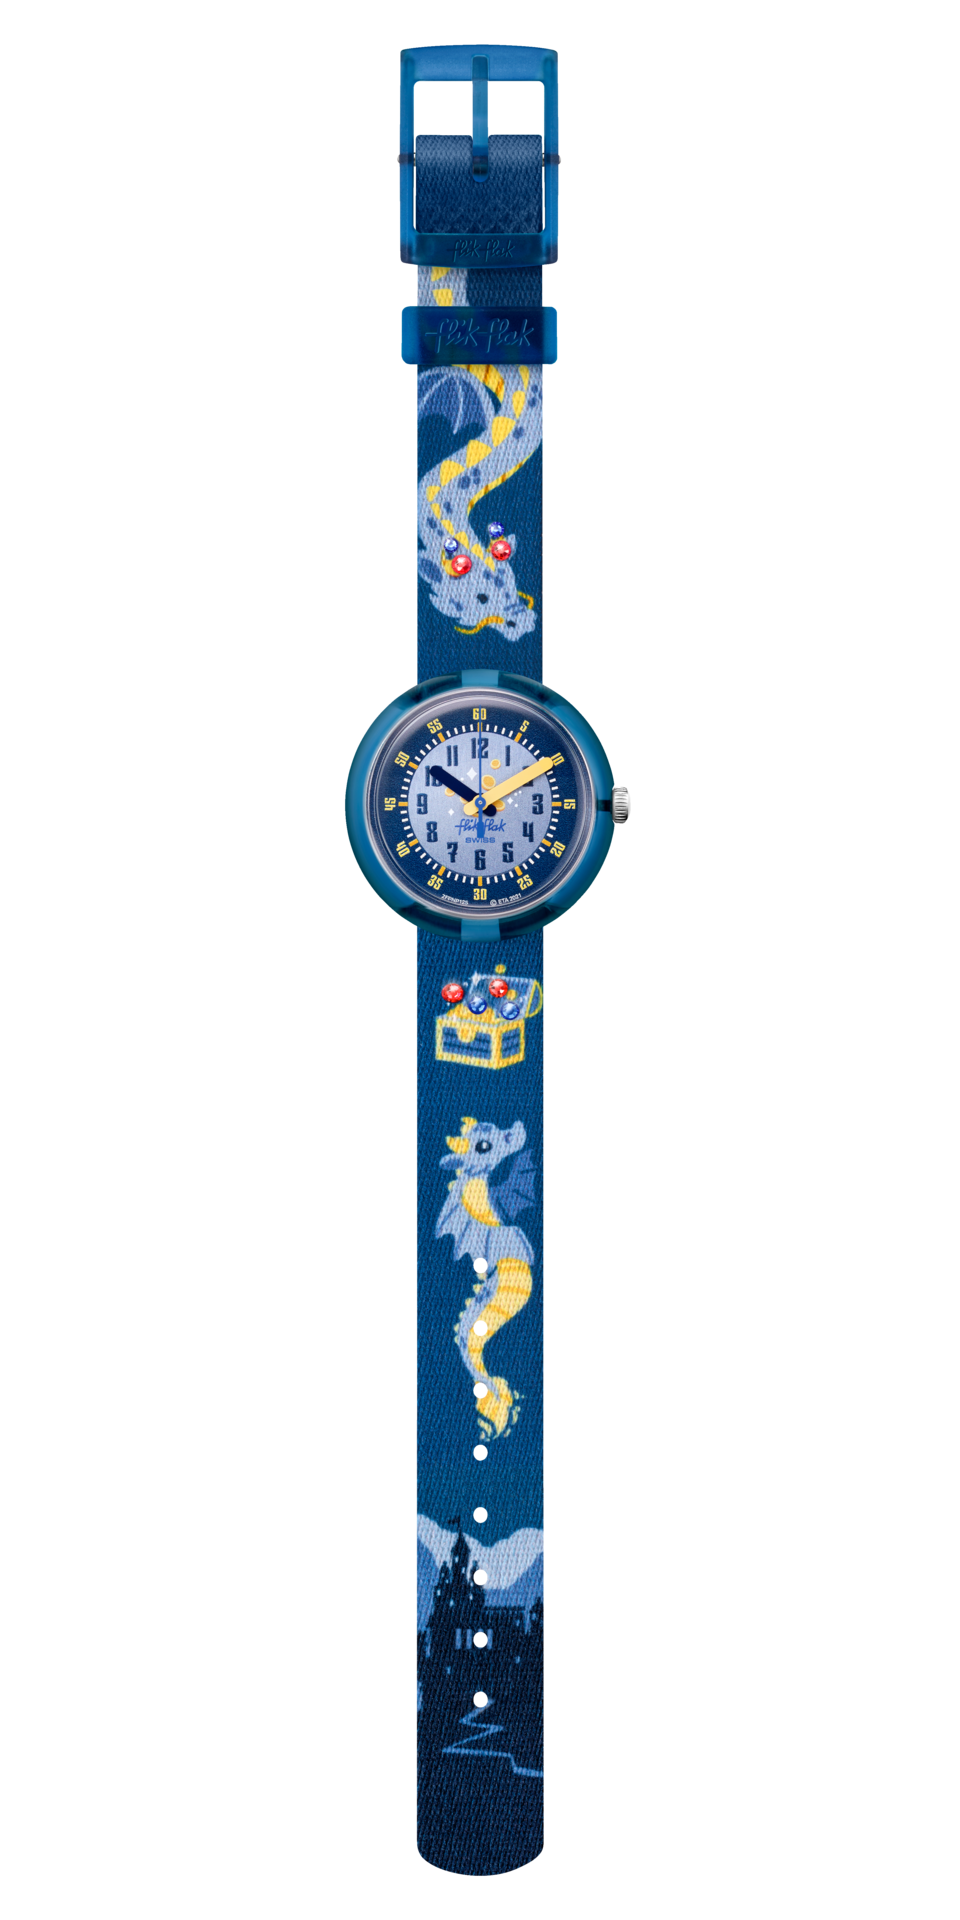 Flik Flak Lover of Dragons Tales Clock from the World 32 mm FPNP125